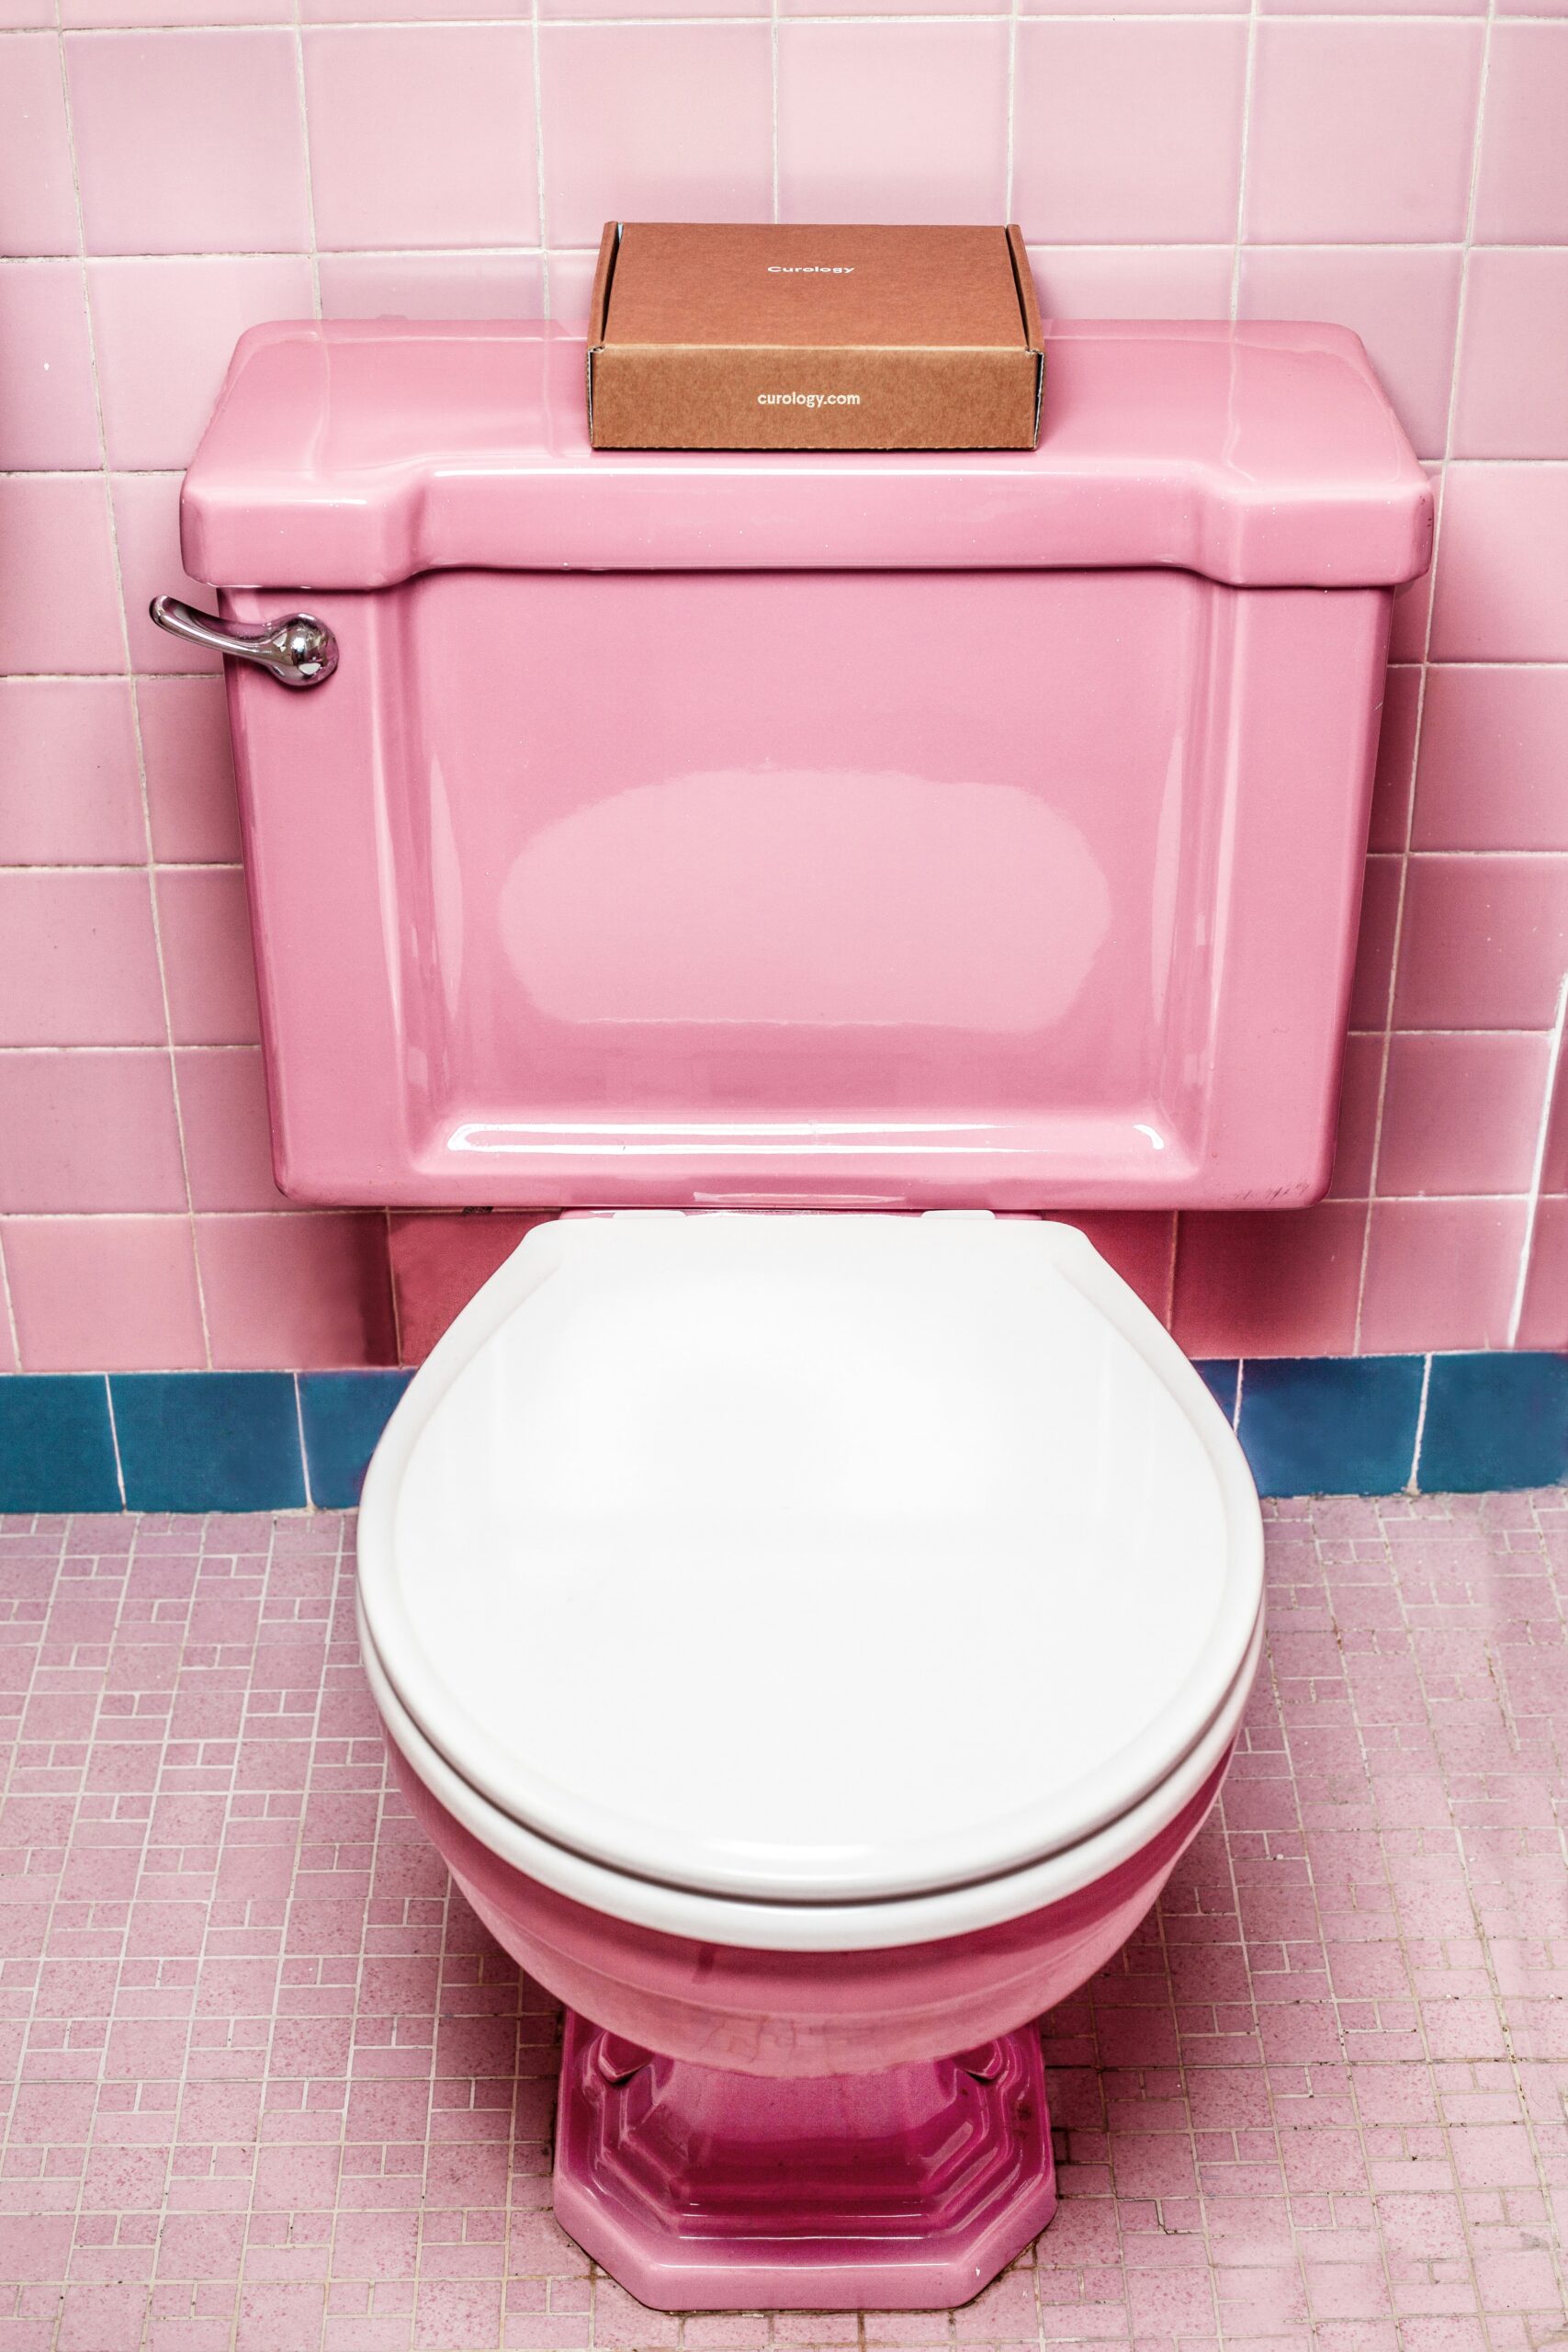 Kids And Toilets How To Prevent Them From Happening